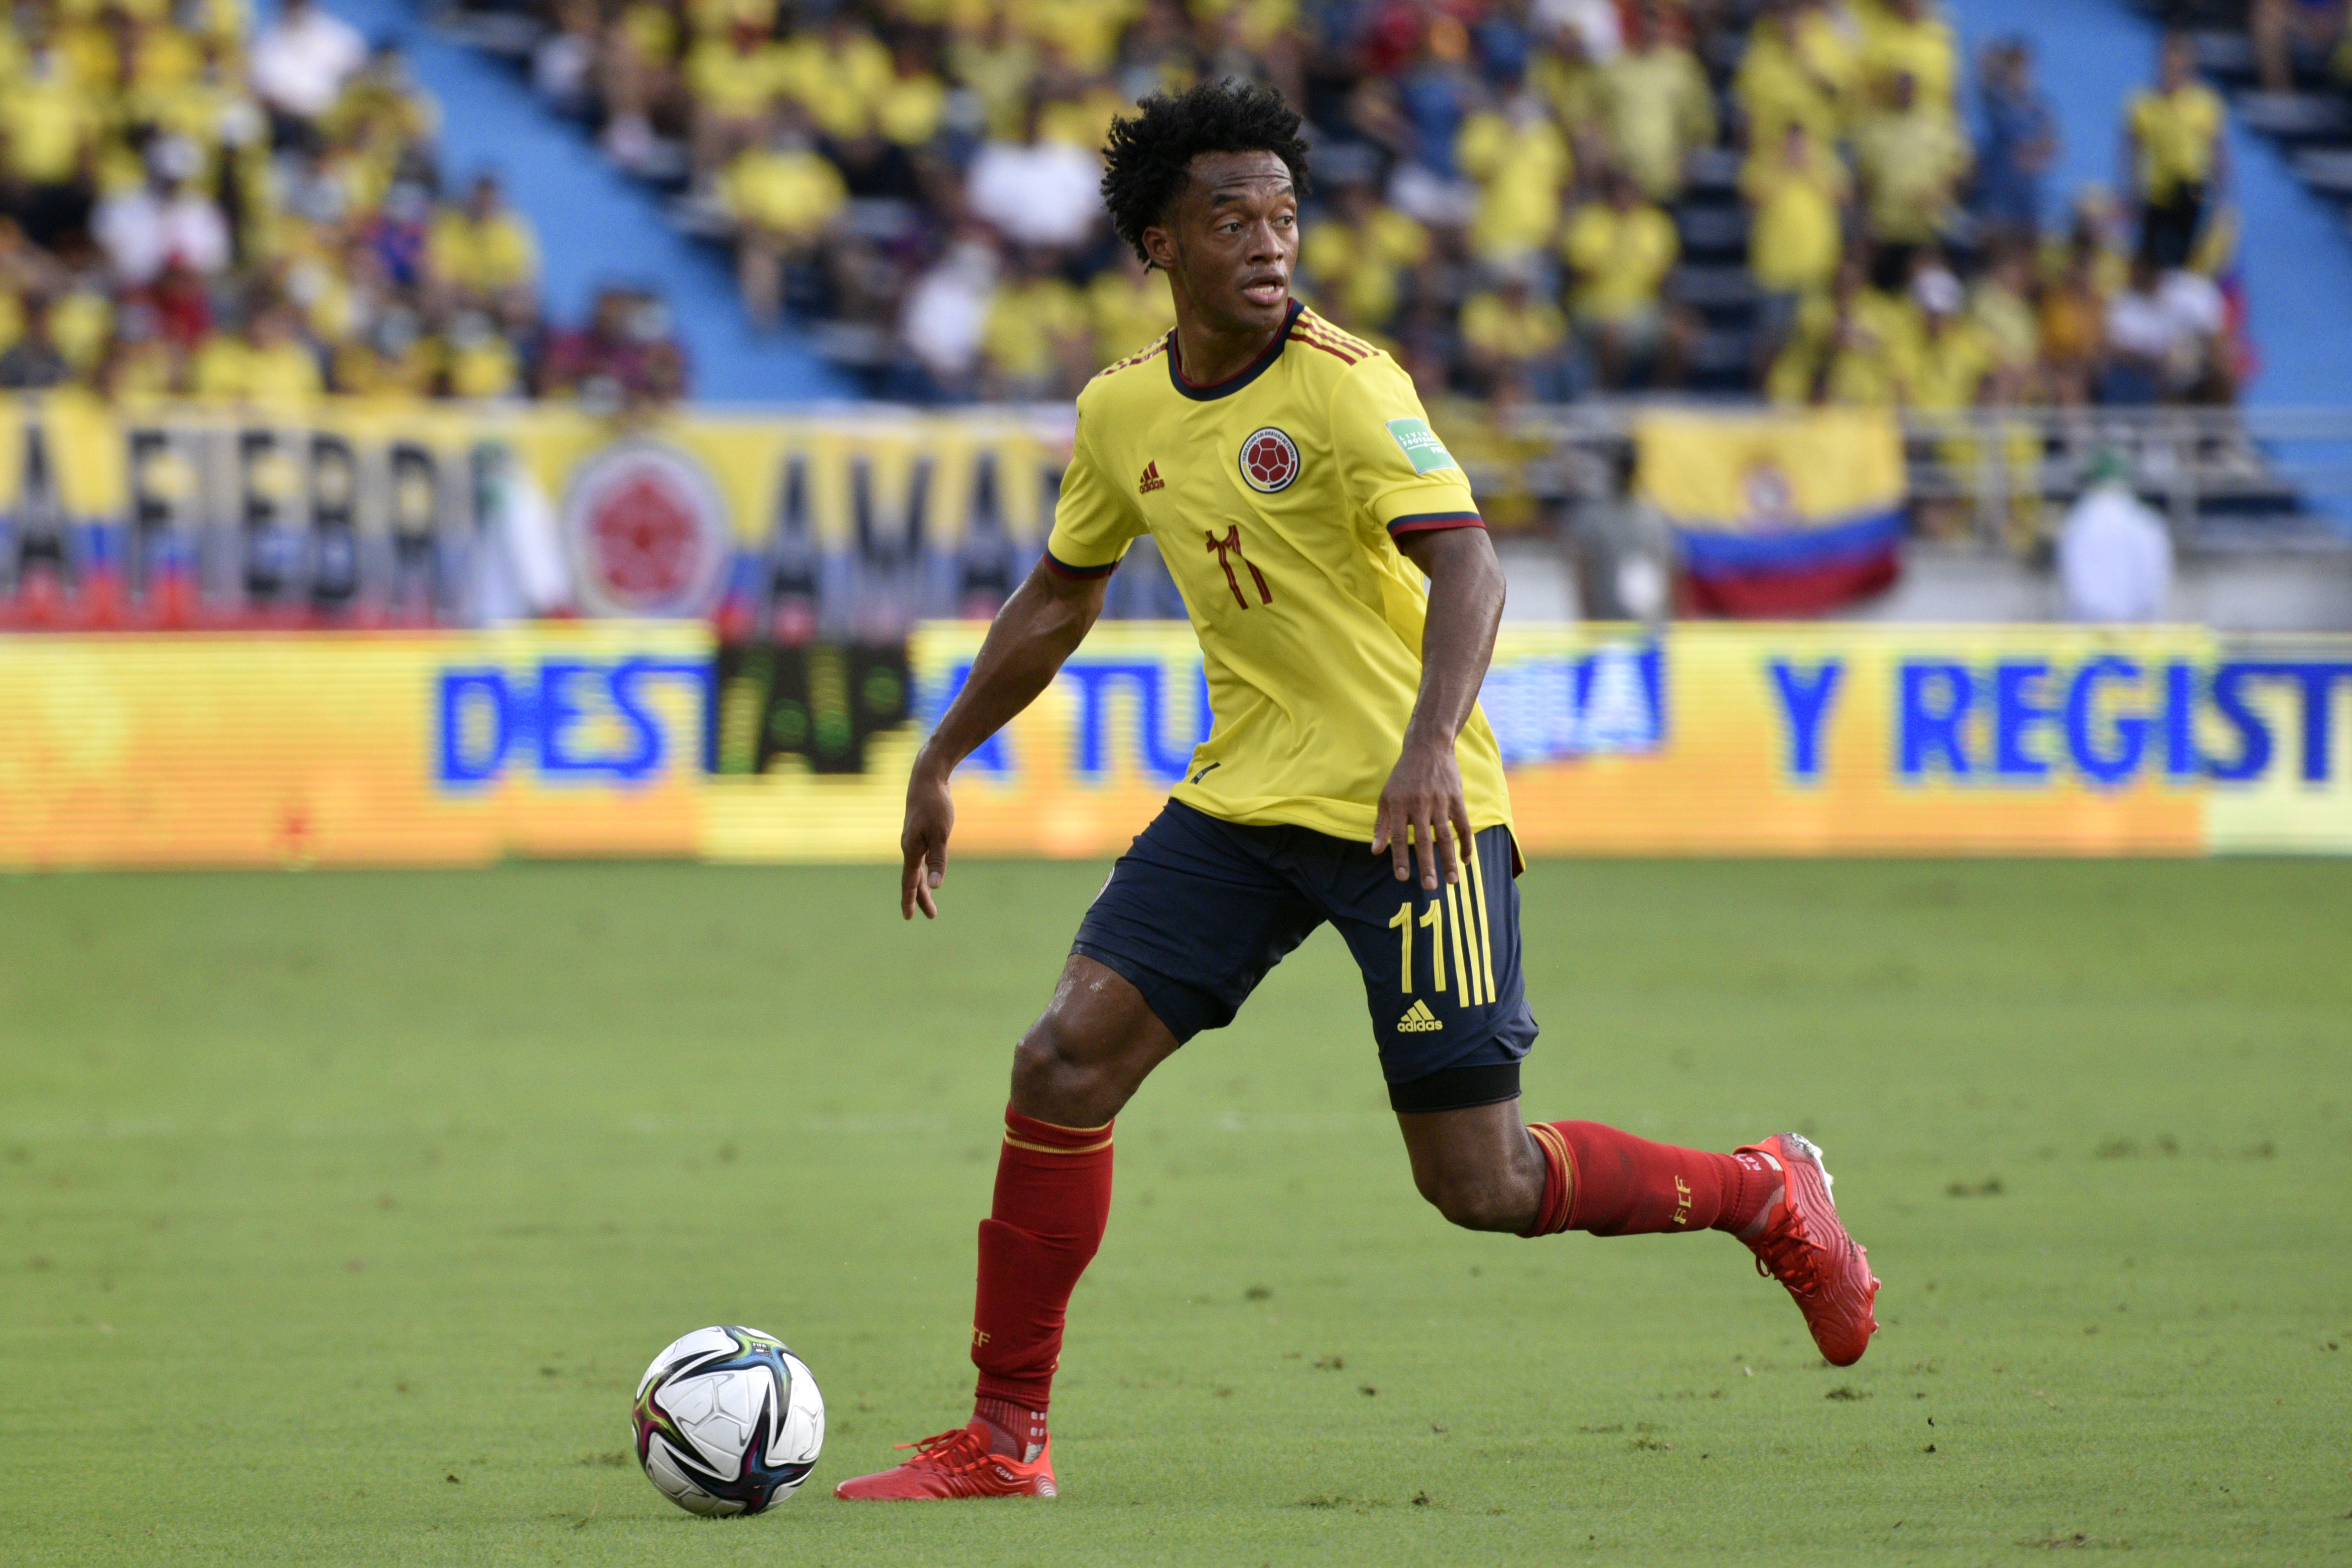 BARRANQUILLA, COLOMBIA - OCTOBER 14: Juan Cuadrado of Colombia controls the ball during a match between Colombia and Ecuador as part of South American Qualifiers for Qatar 2022 at Estadio Metropolitano on October 14, 2021 in Barranquilla, Colombia. (Photo by Guillermo Legaria/Getty Images)